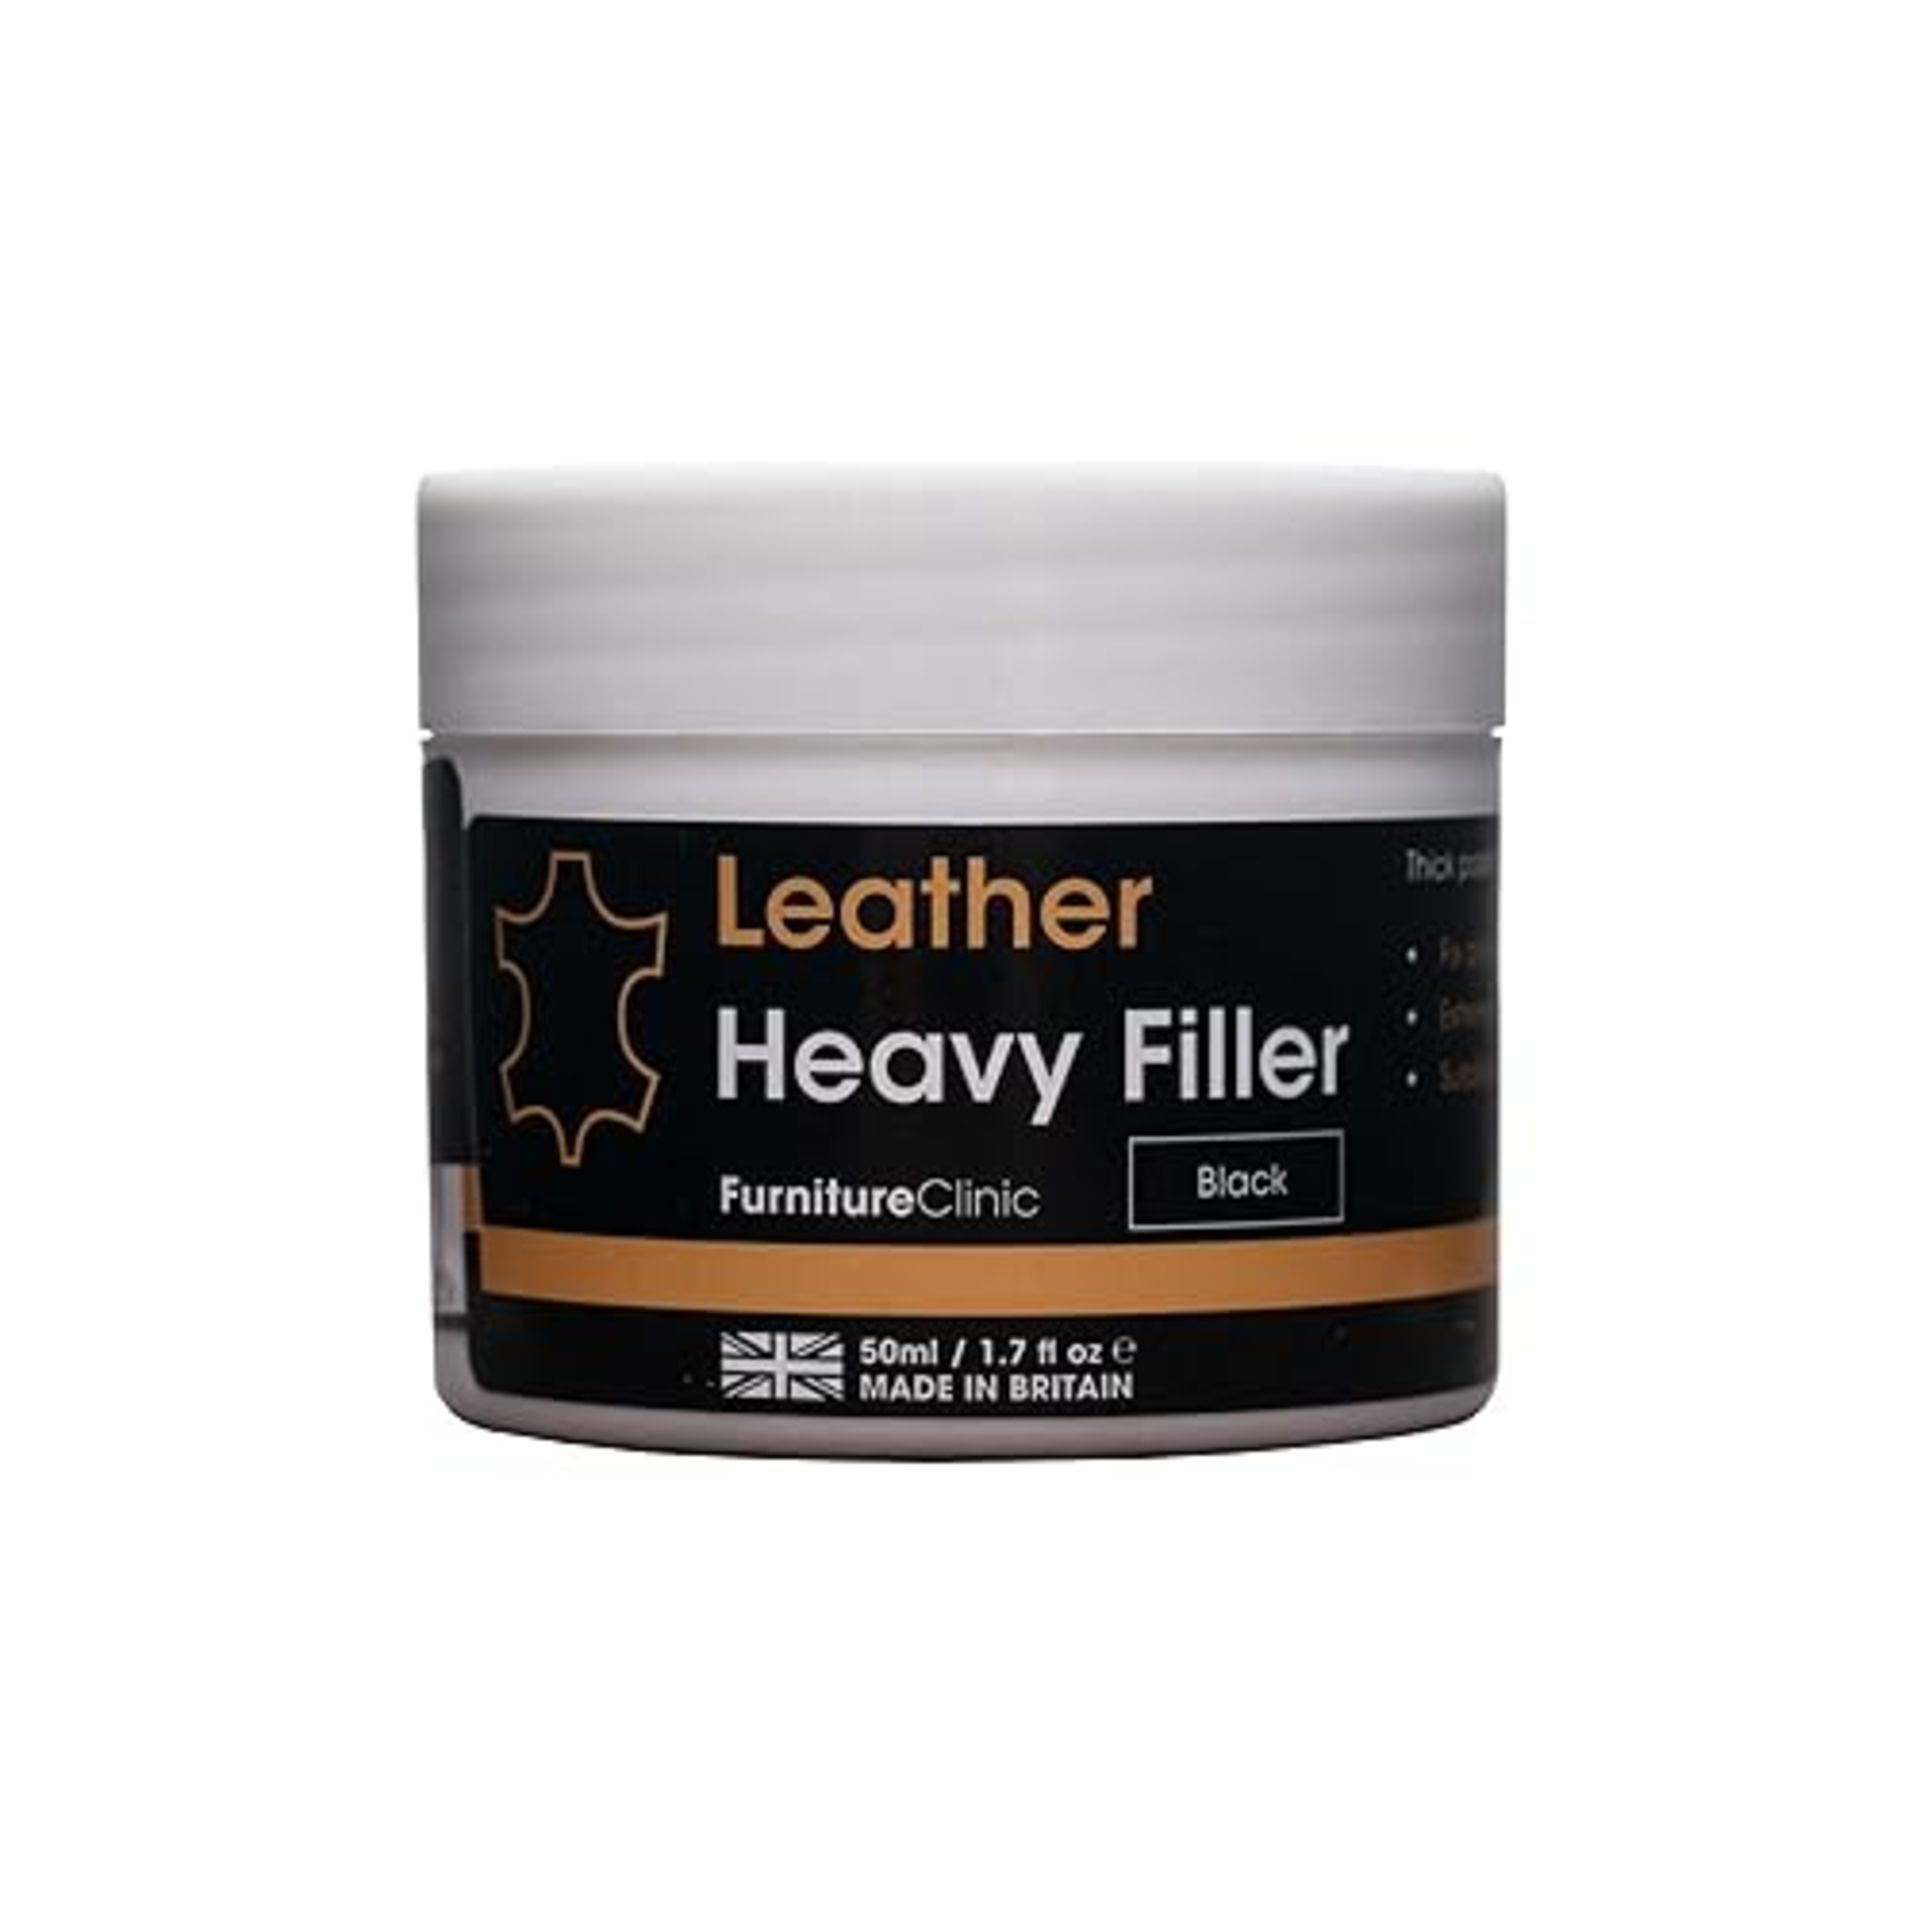 Leather Repair Filler (Black) - For Filling Holes, Scuffs, Scratches, Cracking Etc - Heavy Filler -